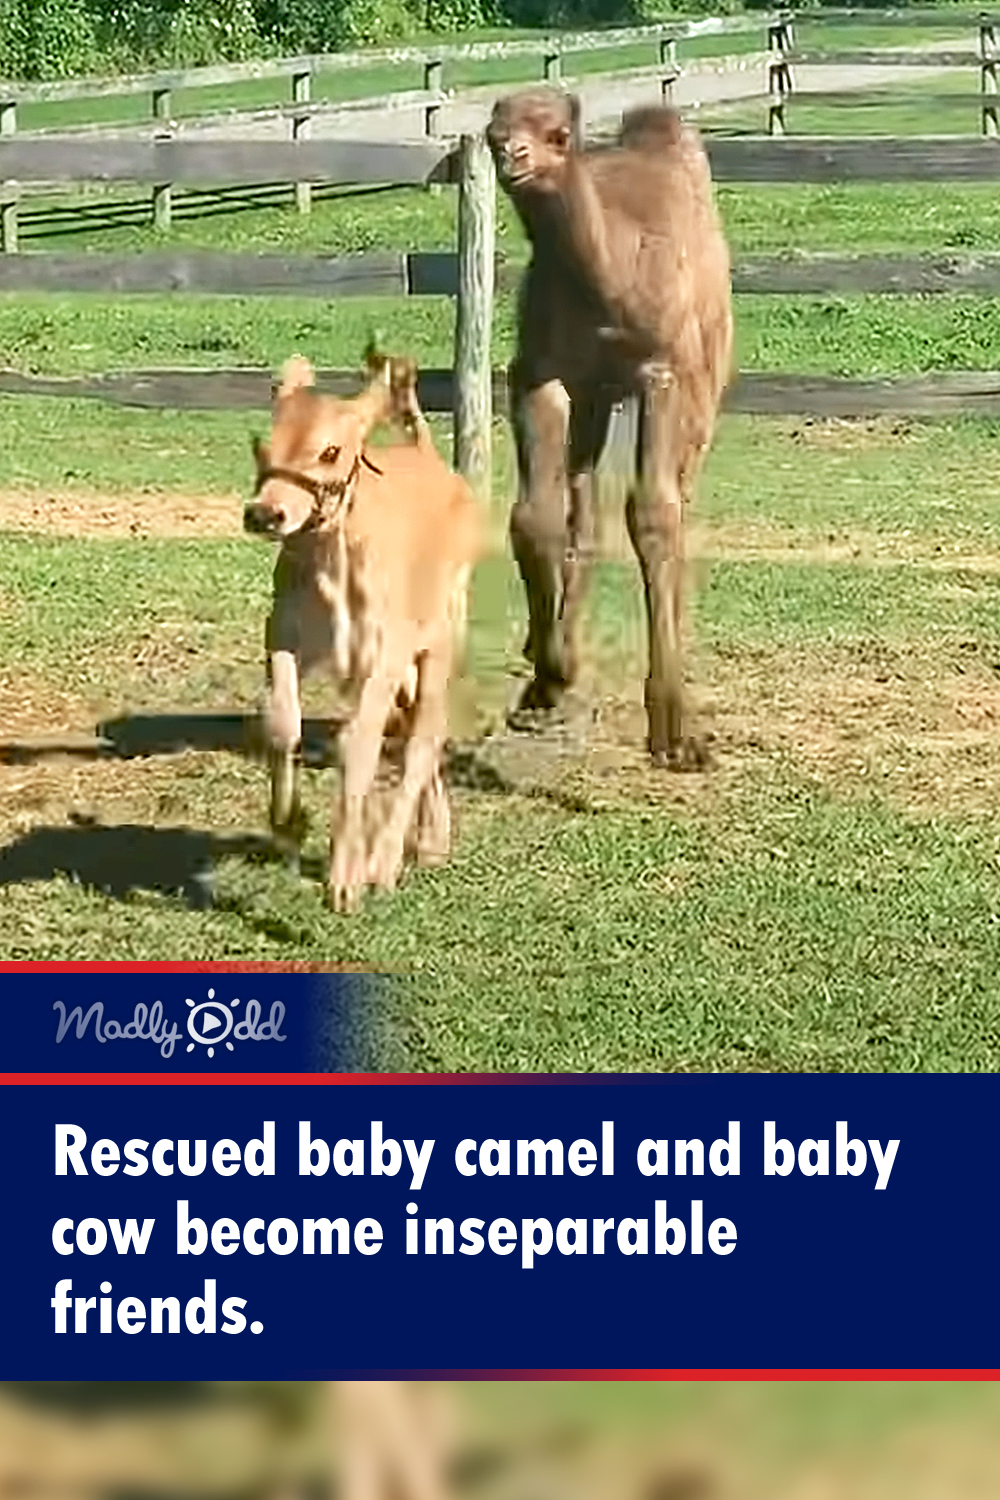 Rescued baby camel and baby cow become inseparable friends